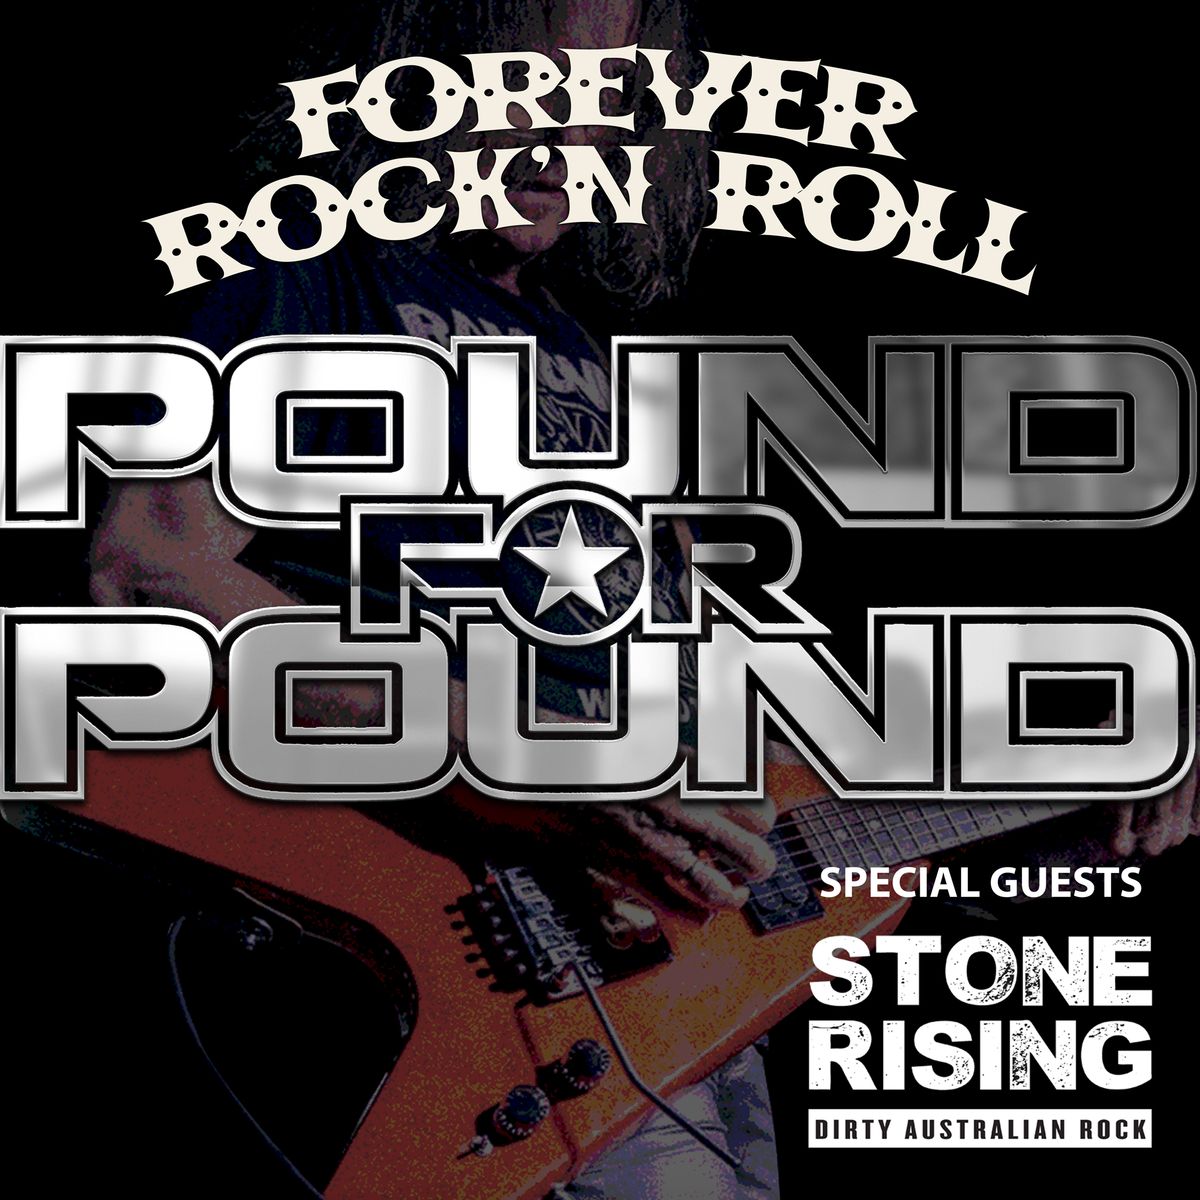 POUND FOR POUND + specials guests Stone Rising | The Bridge Hotel 